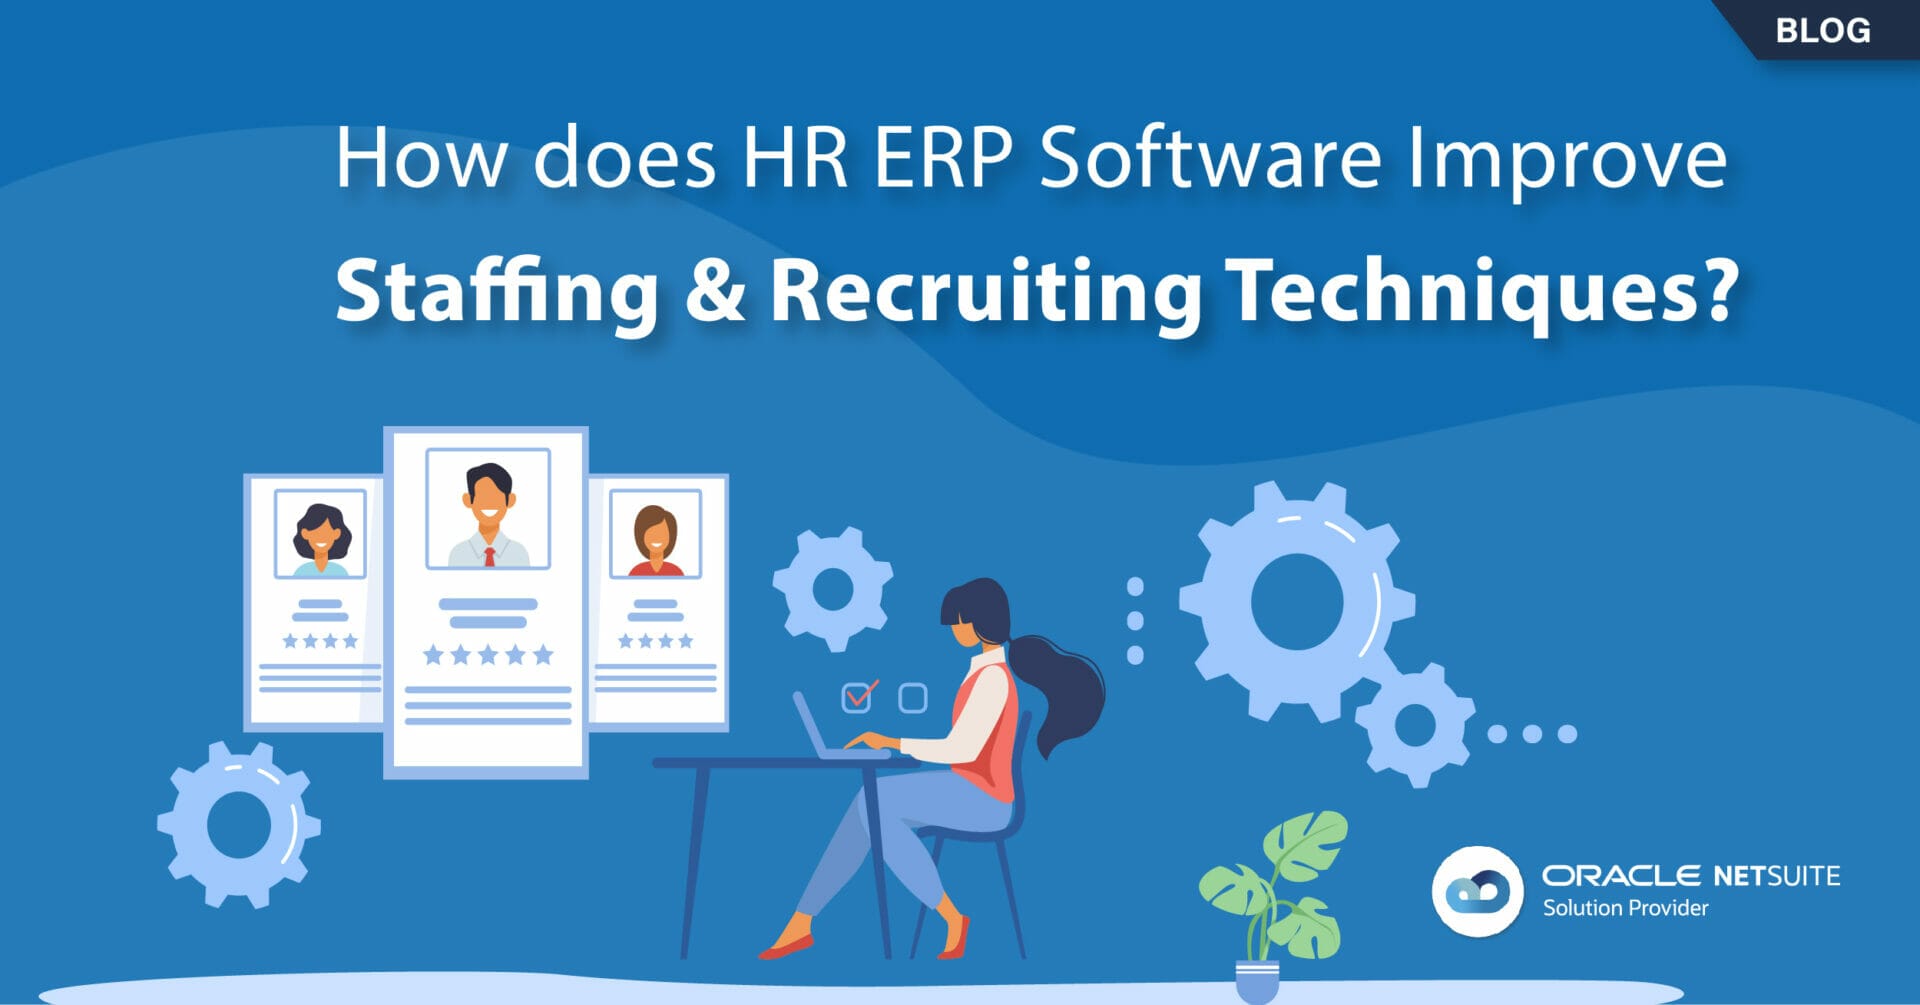 How Does HR ERP Software Improve Staffing and Recruiting Techniques?